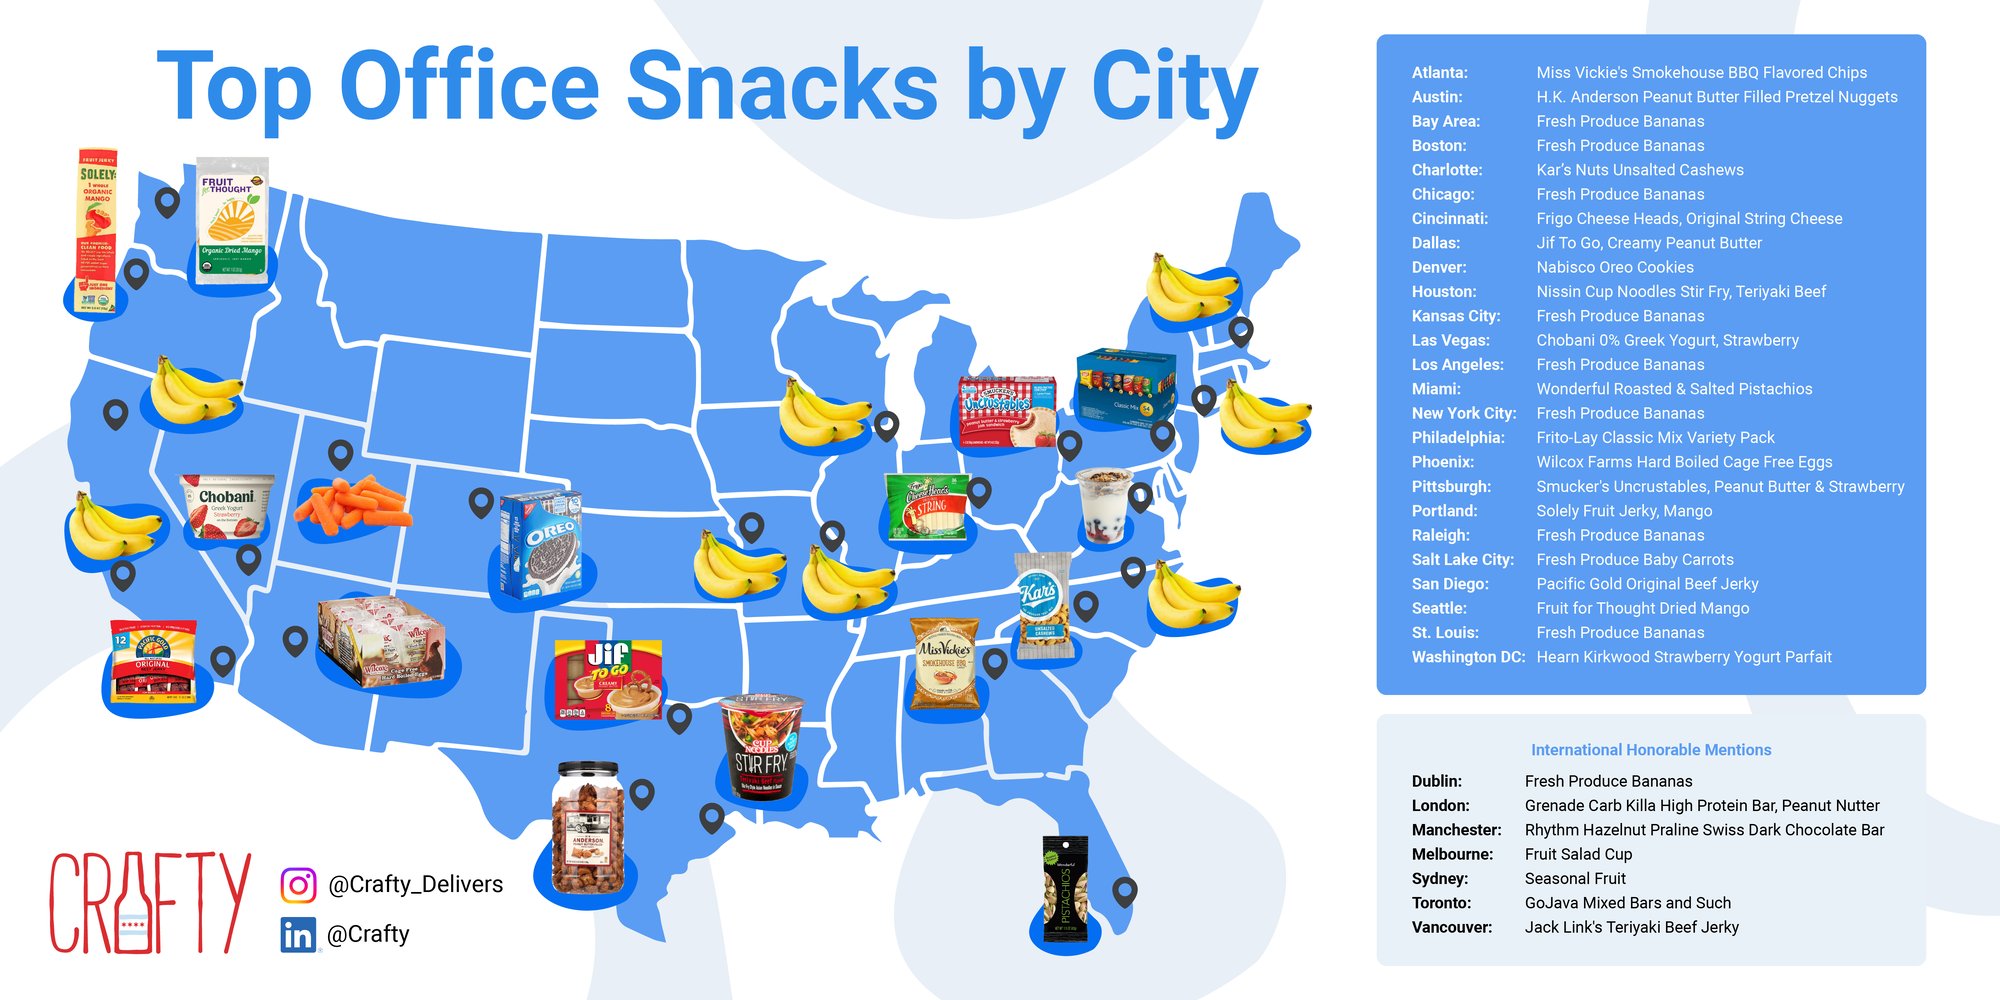 Crafty Top Office Snacks by City in the US and International